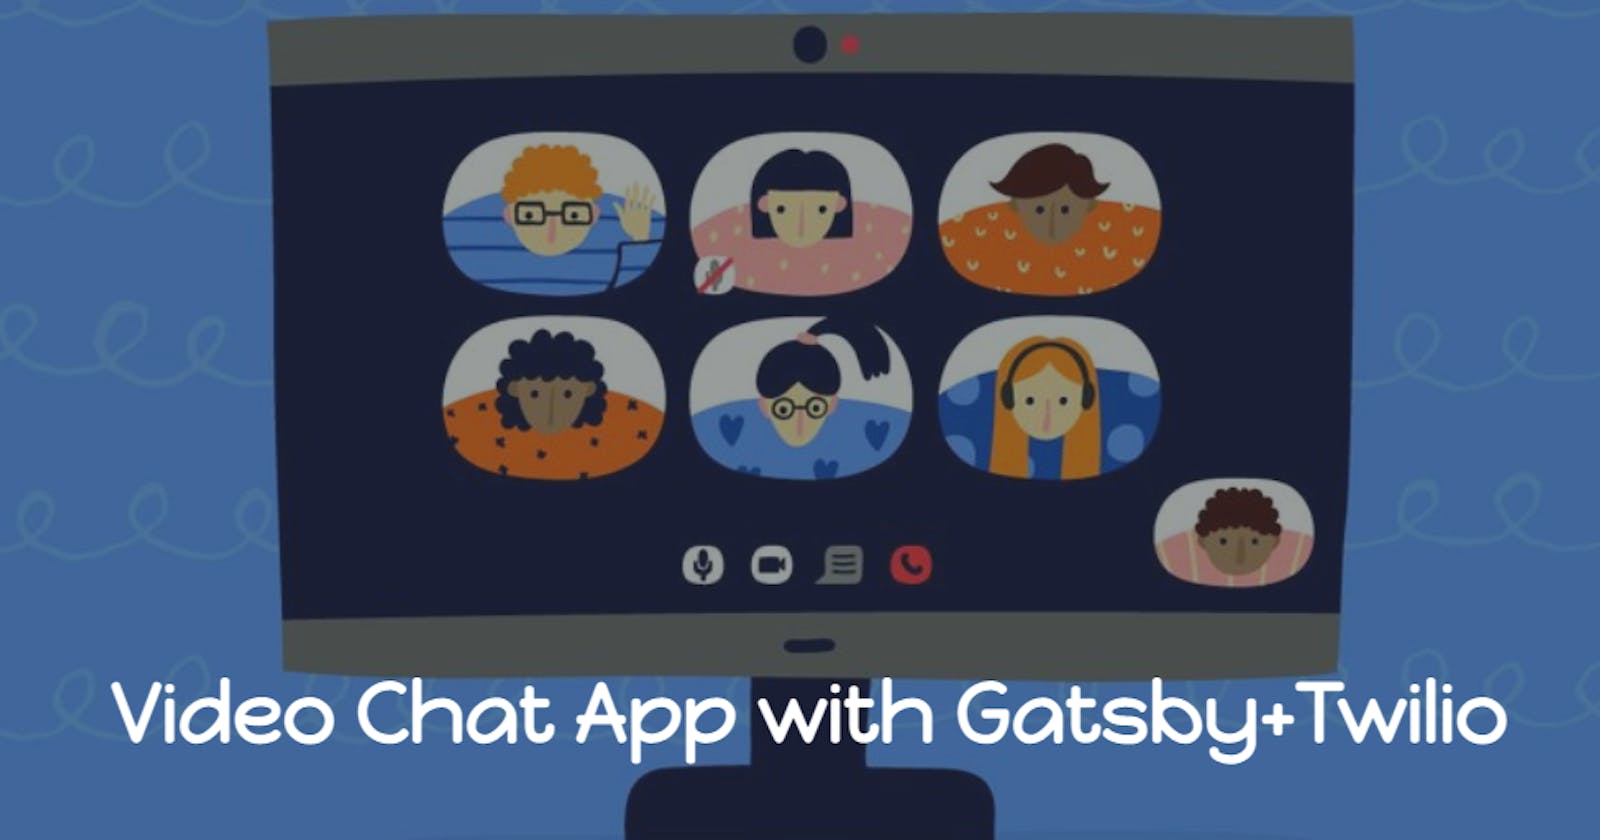 Video Chat App with Gatsby+Twilio